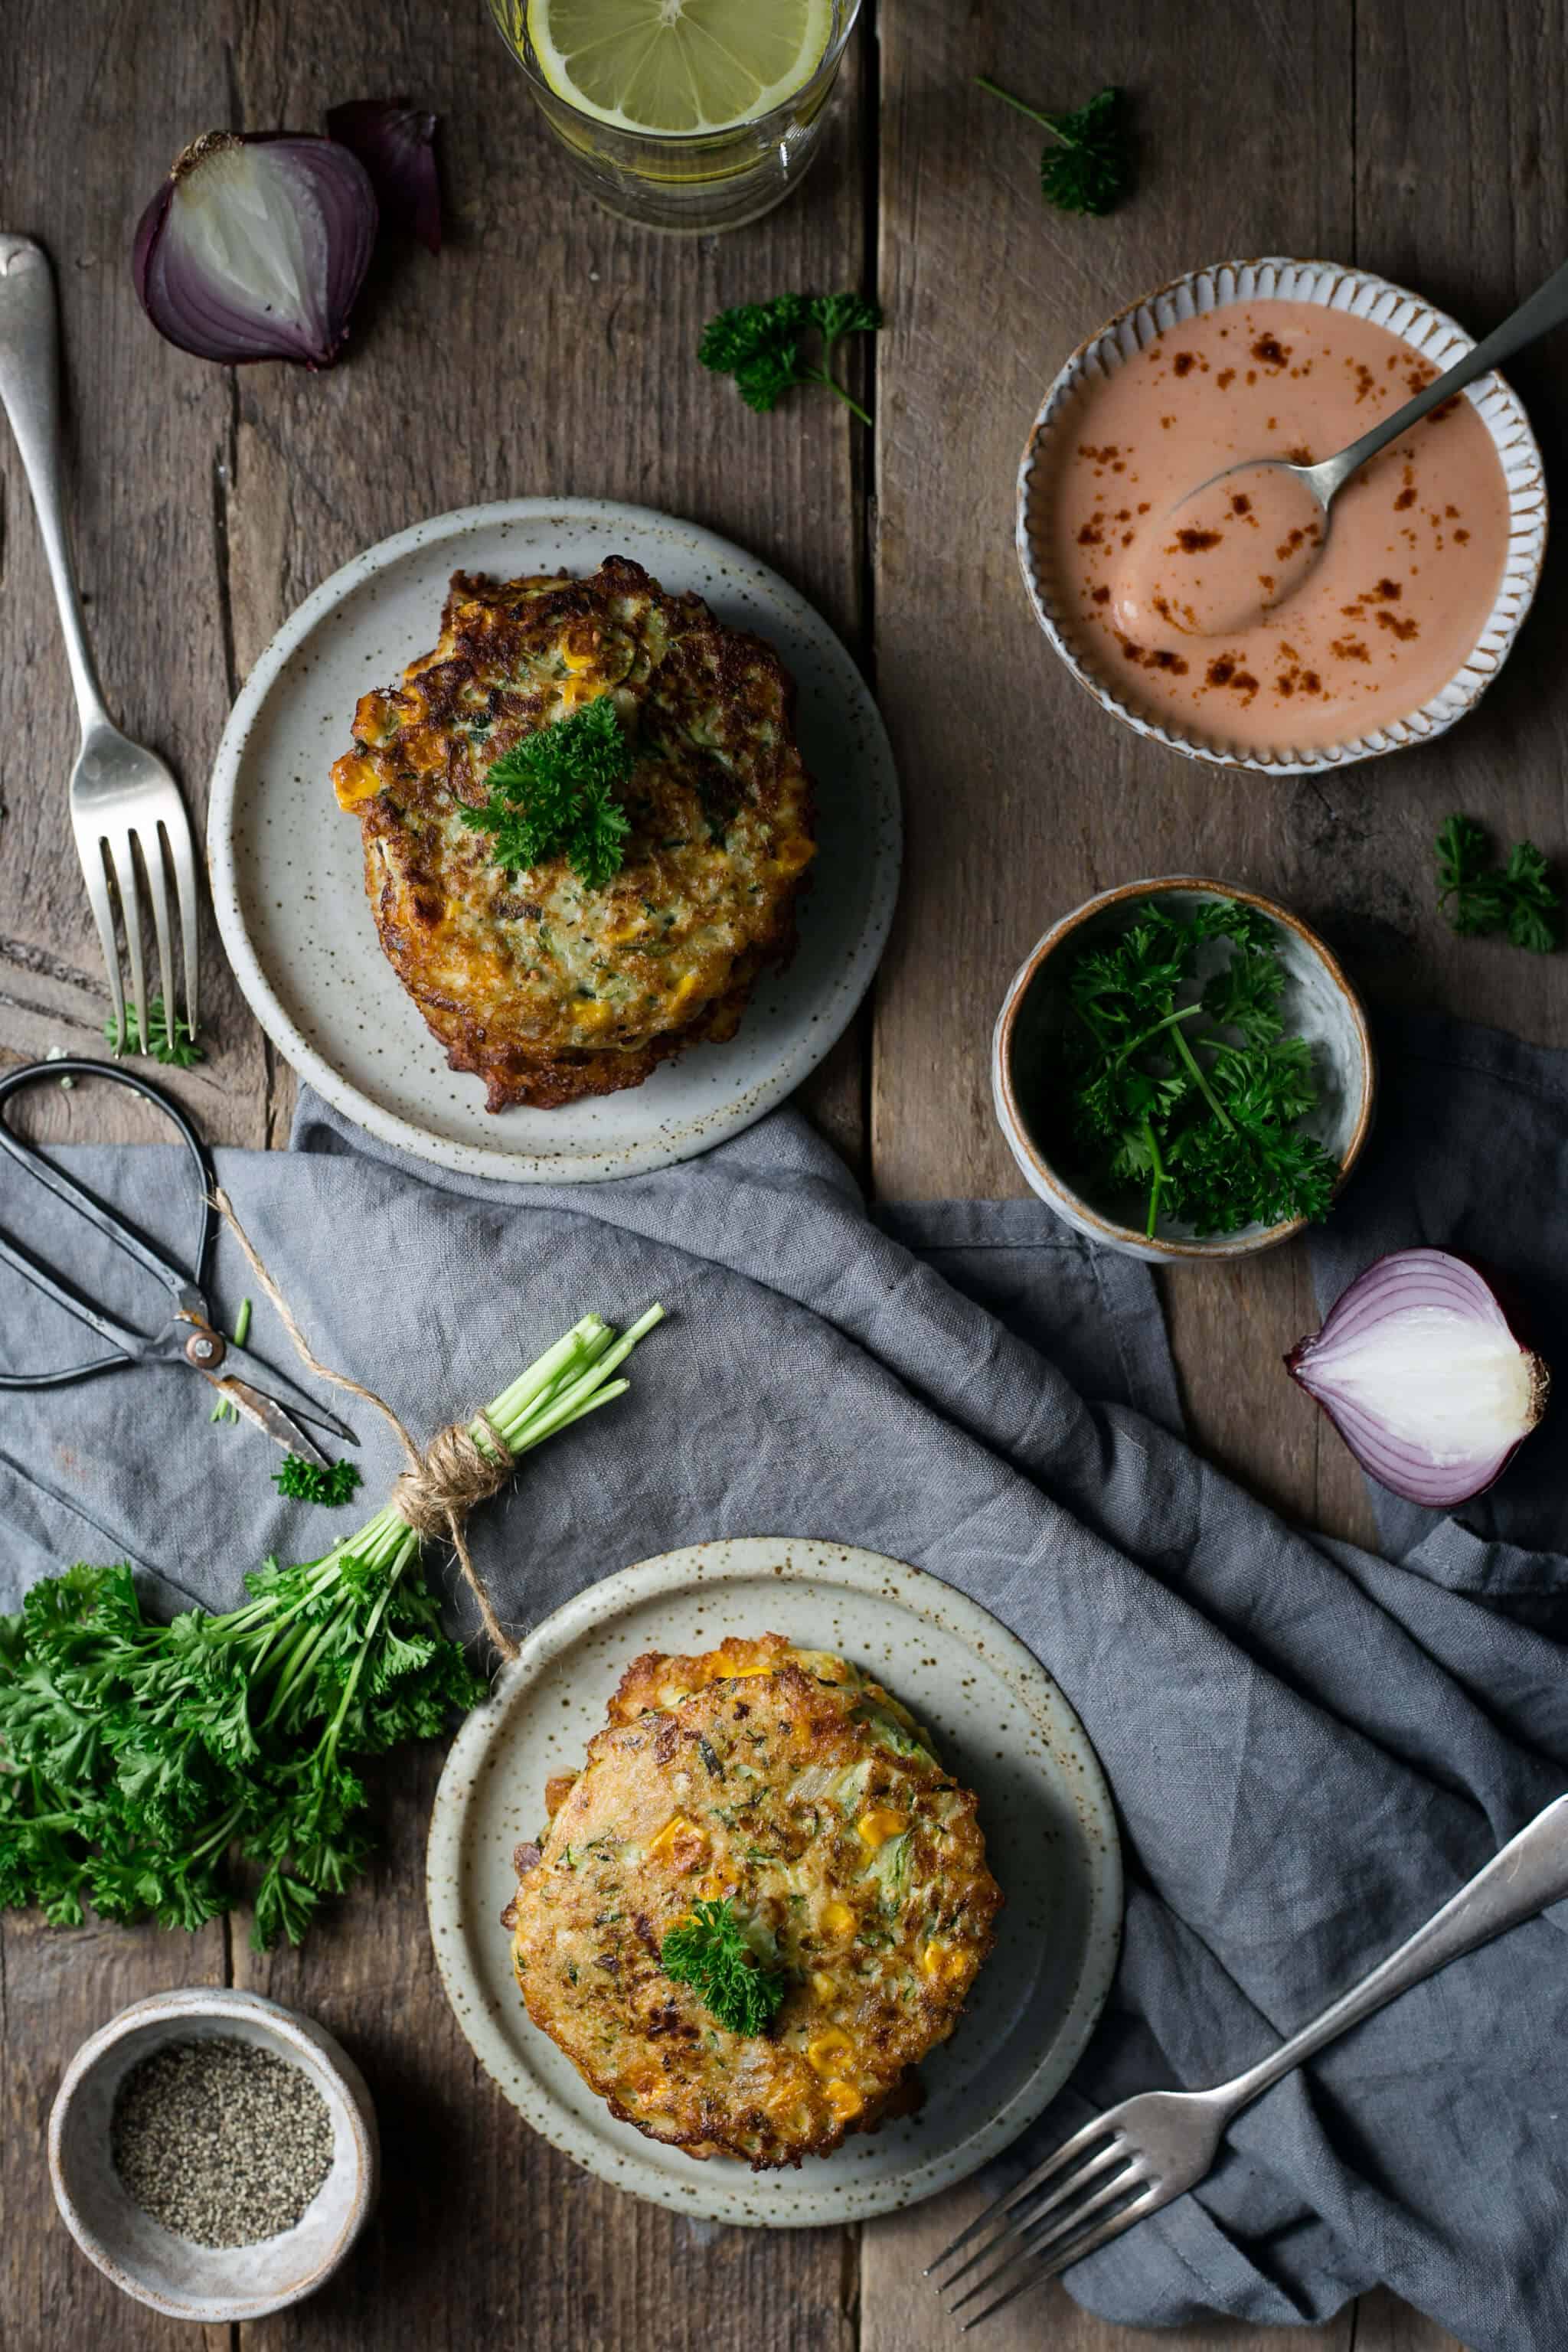 Courgette and corn fritters served with spicy dip | via @annabanana.co